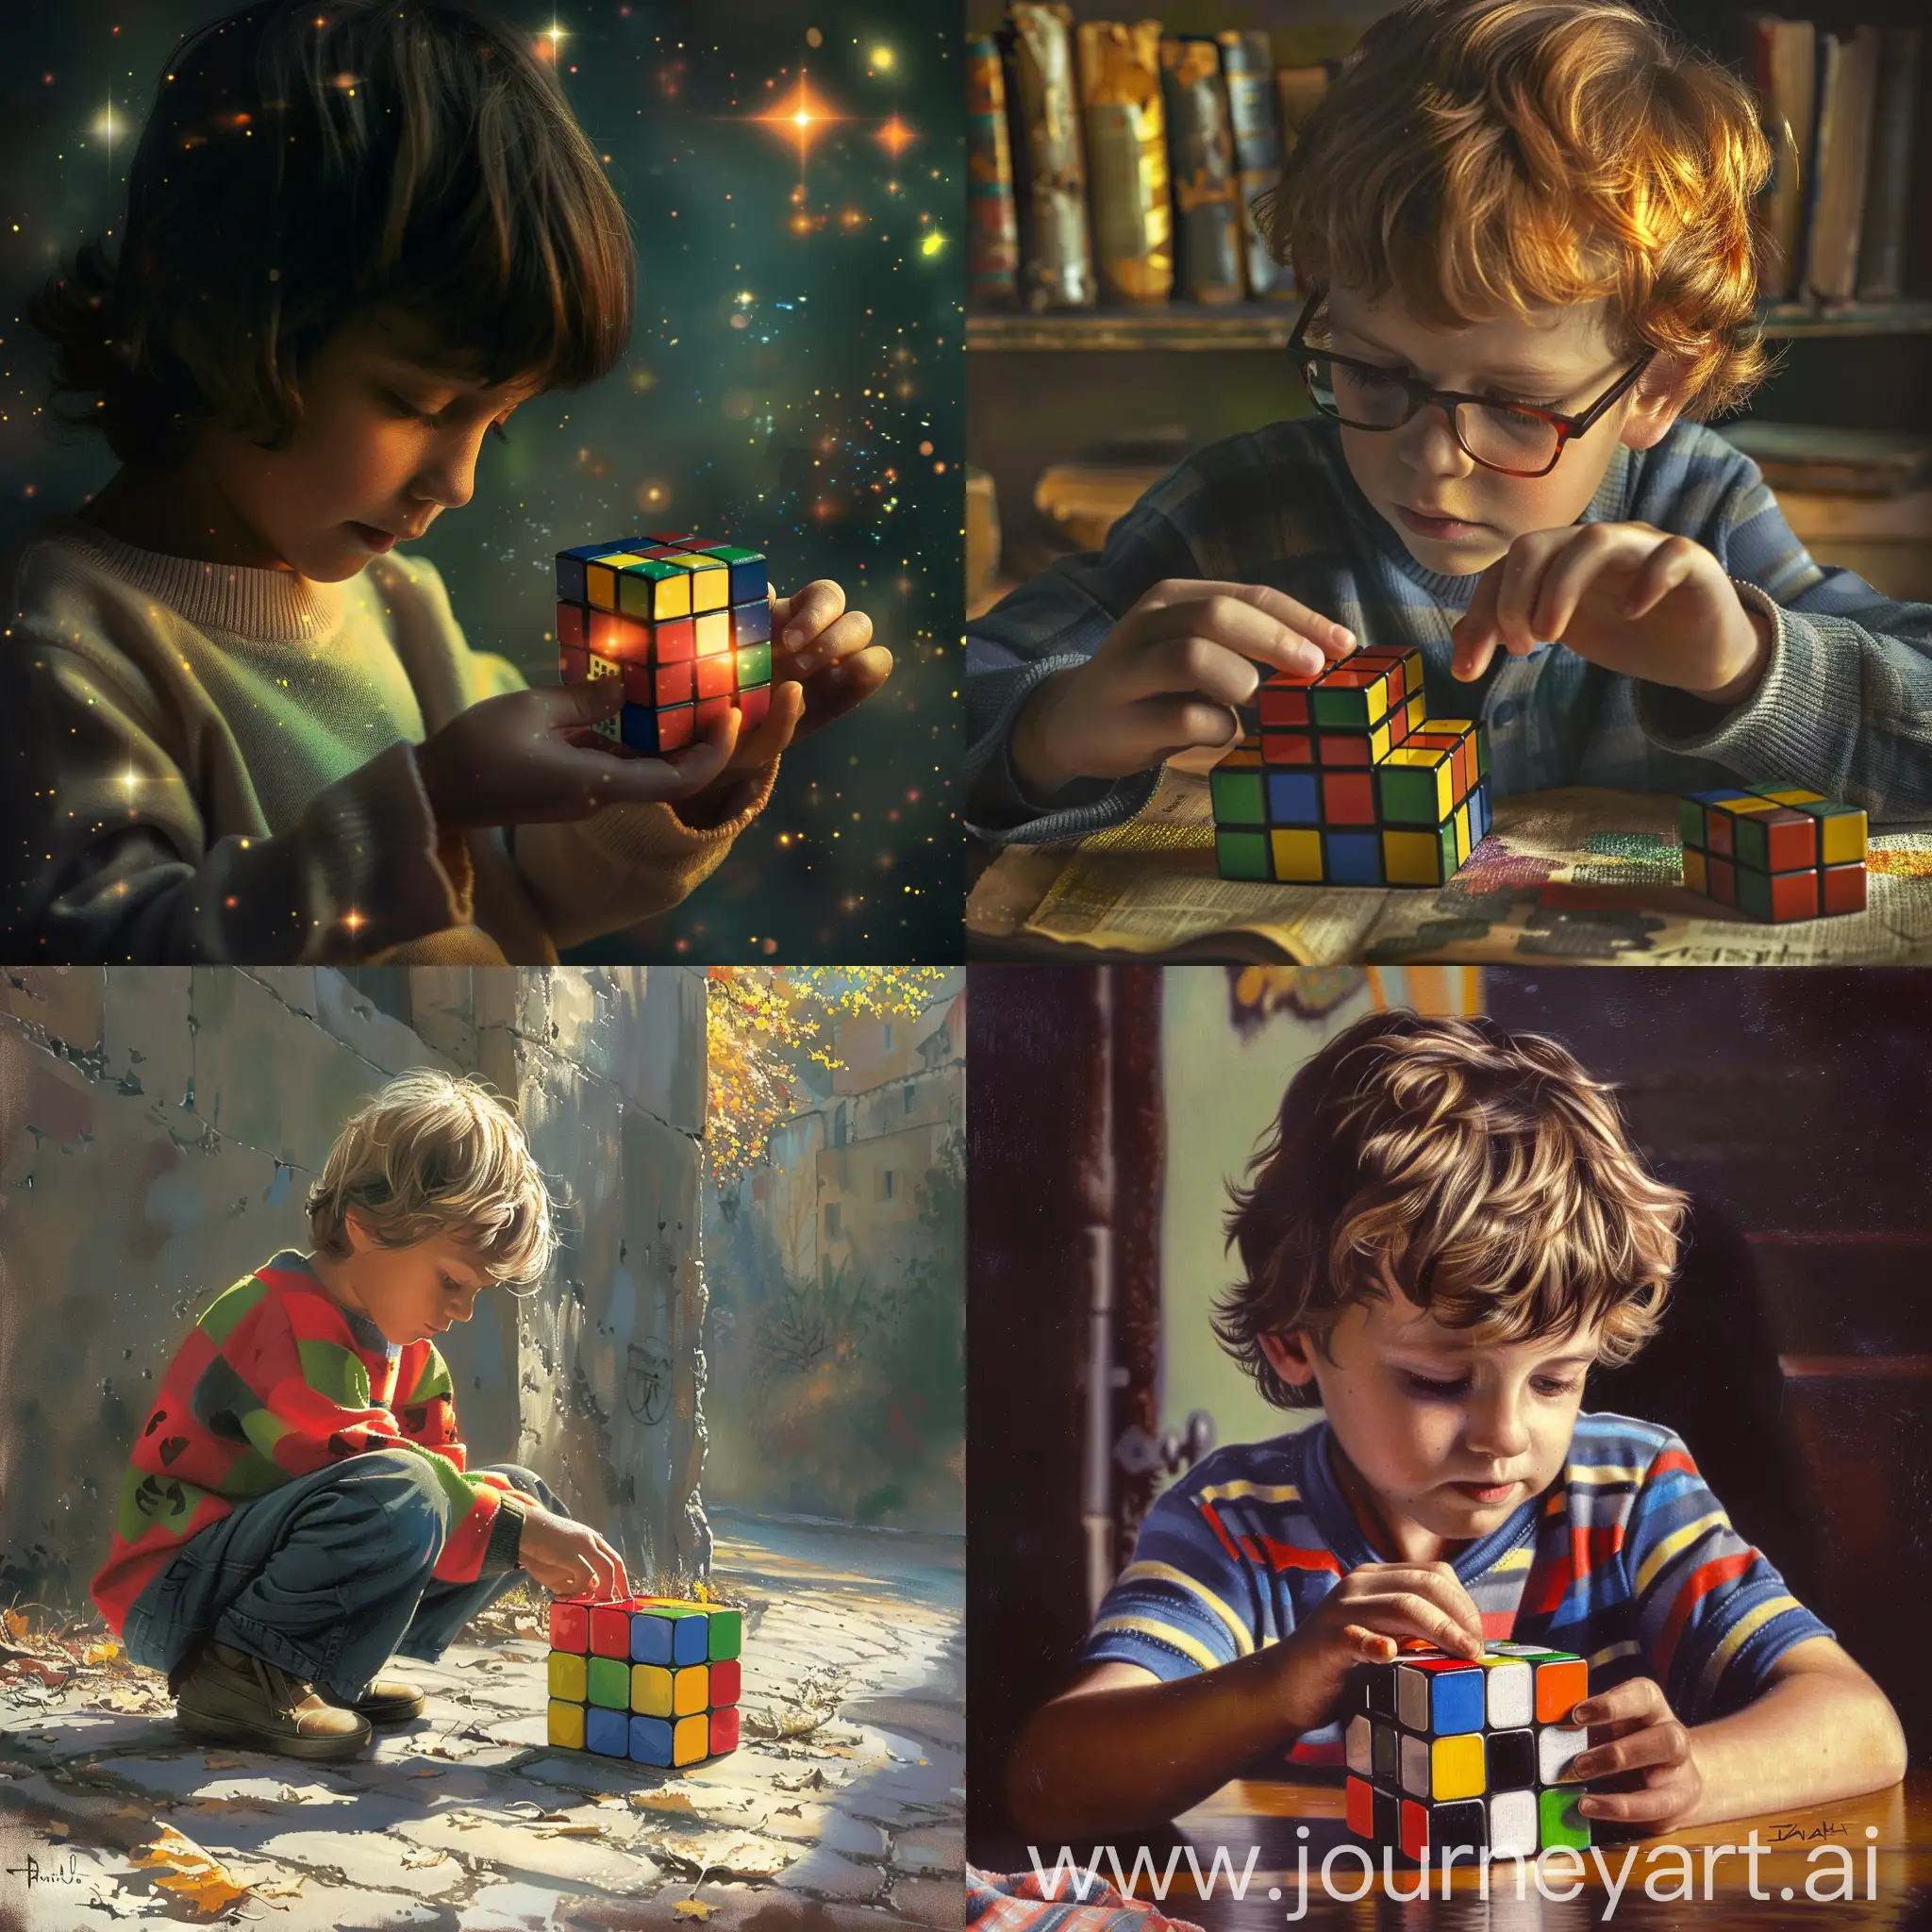 Child-Solving-Rubiks-Cube-Concentrated-Puzzlesolving-Fun